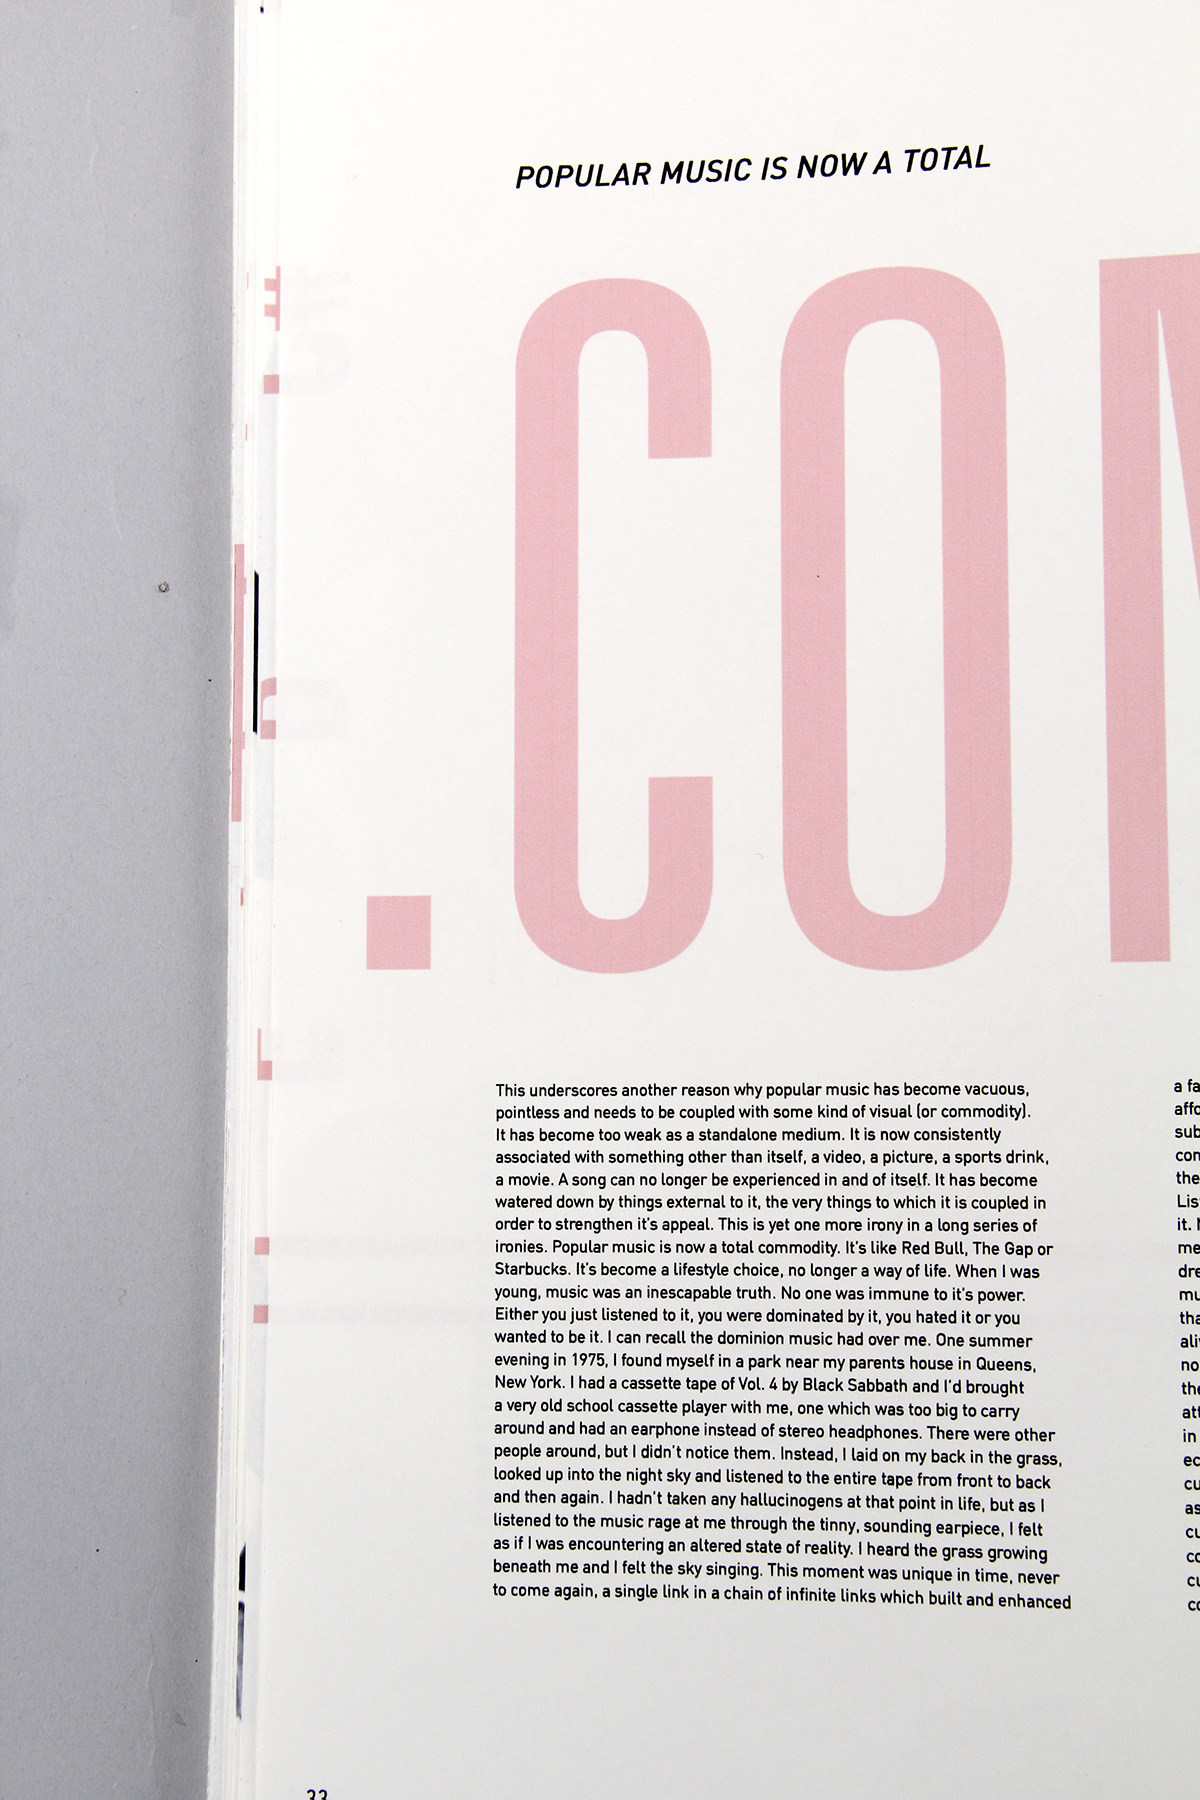 istd type publication printed product periodical design sinead foley